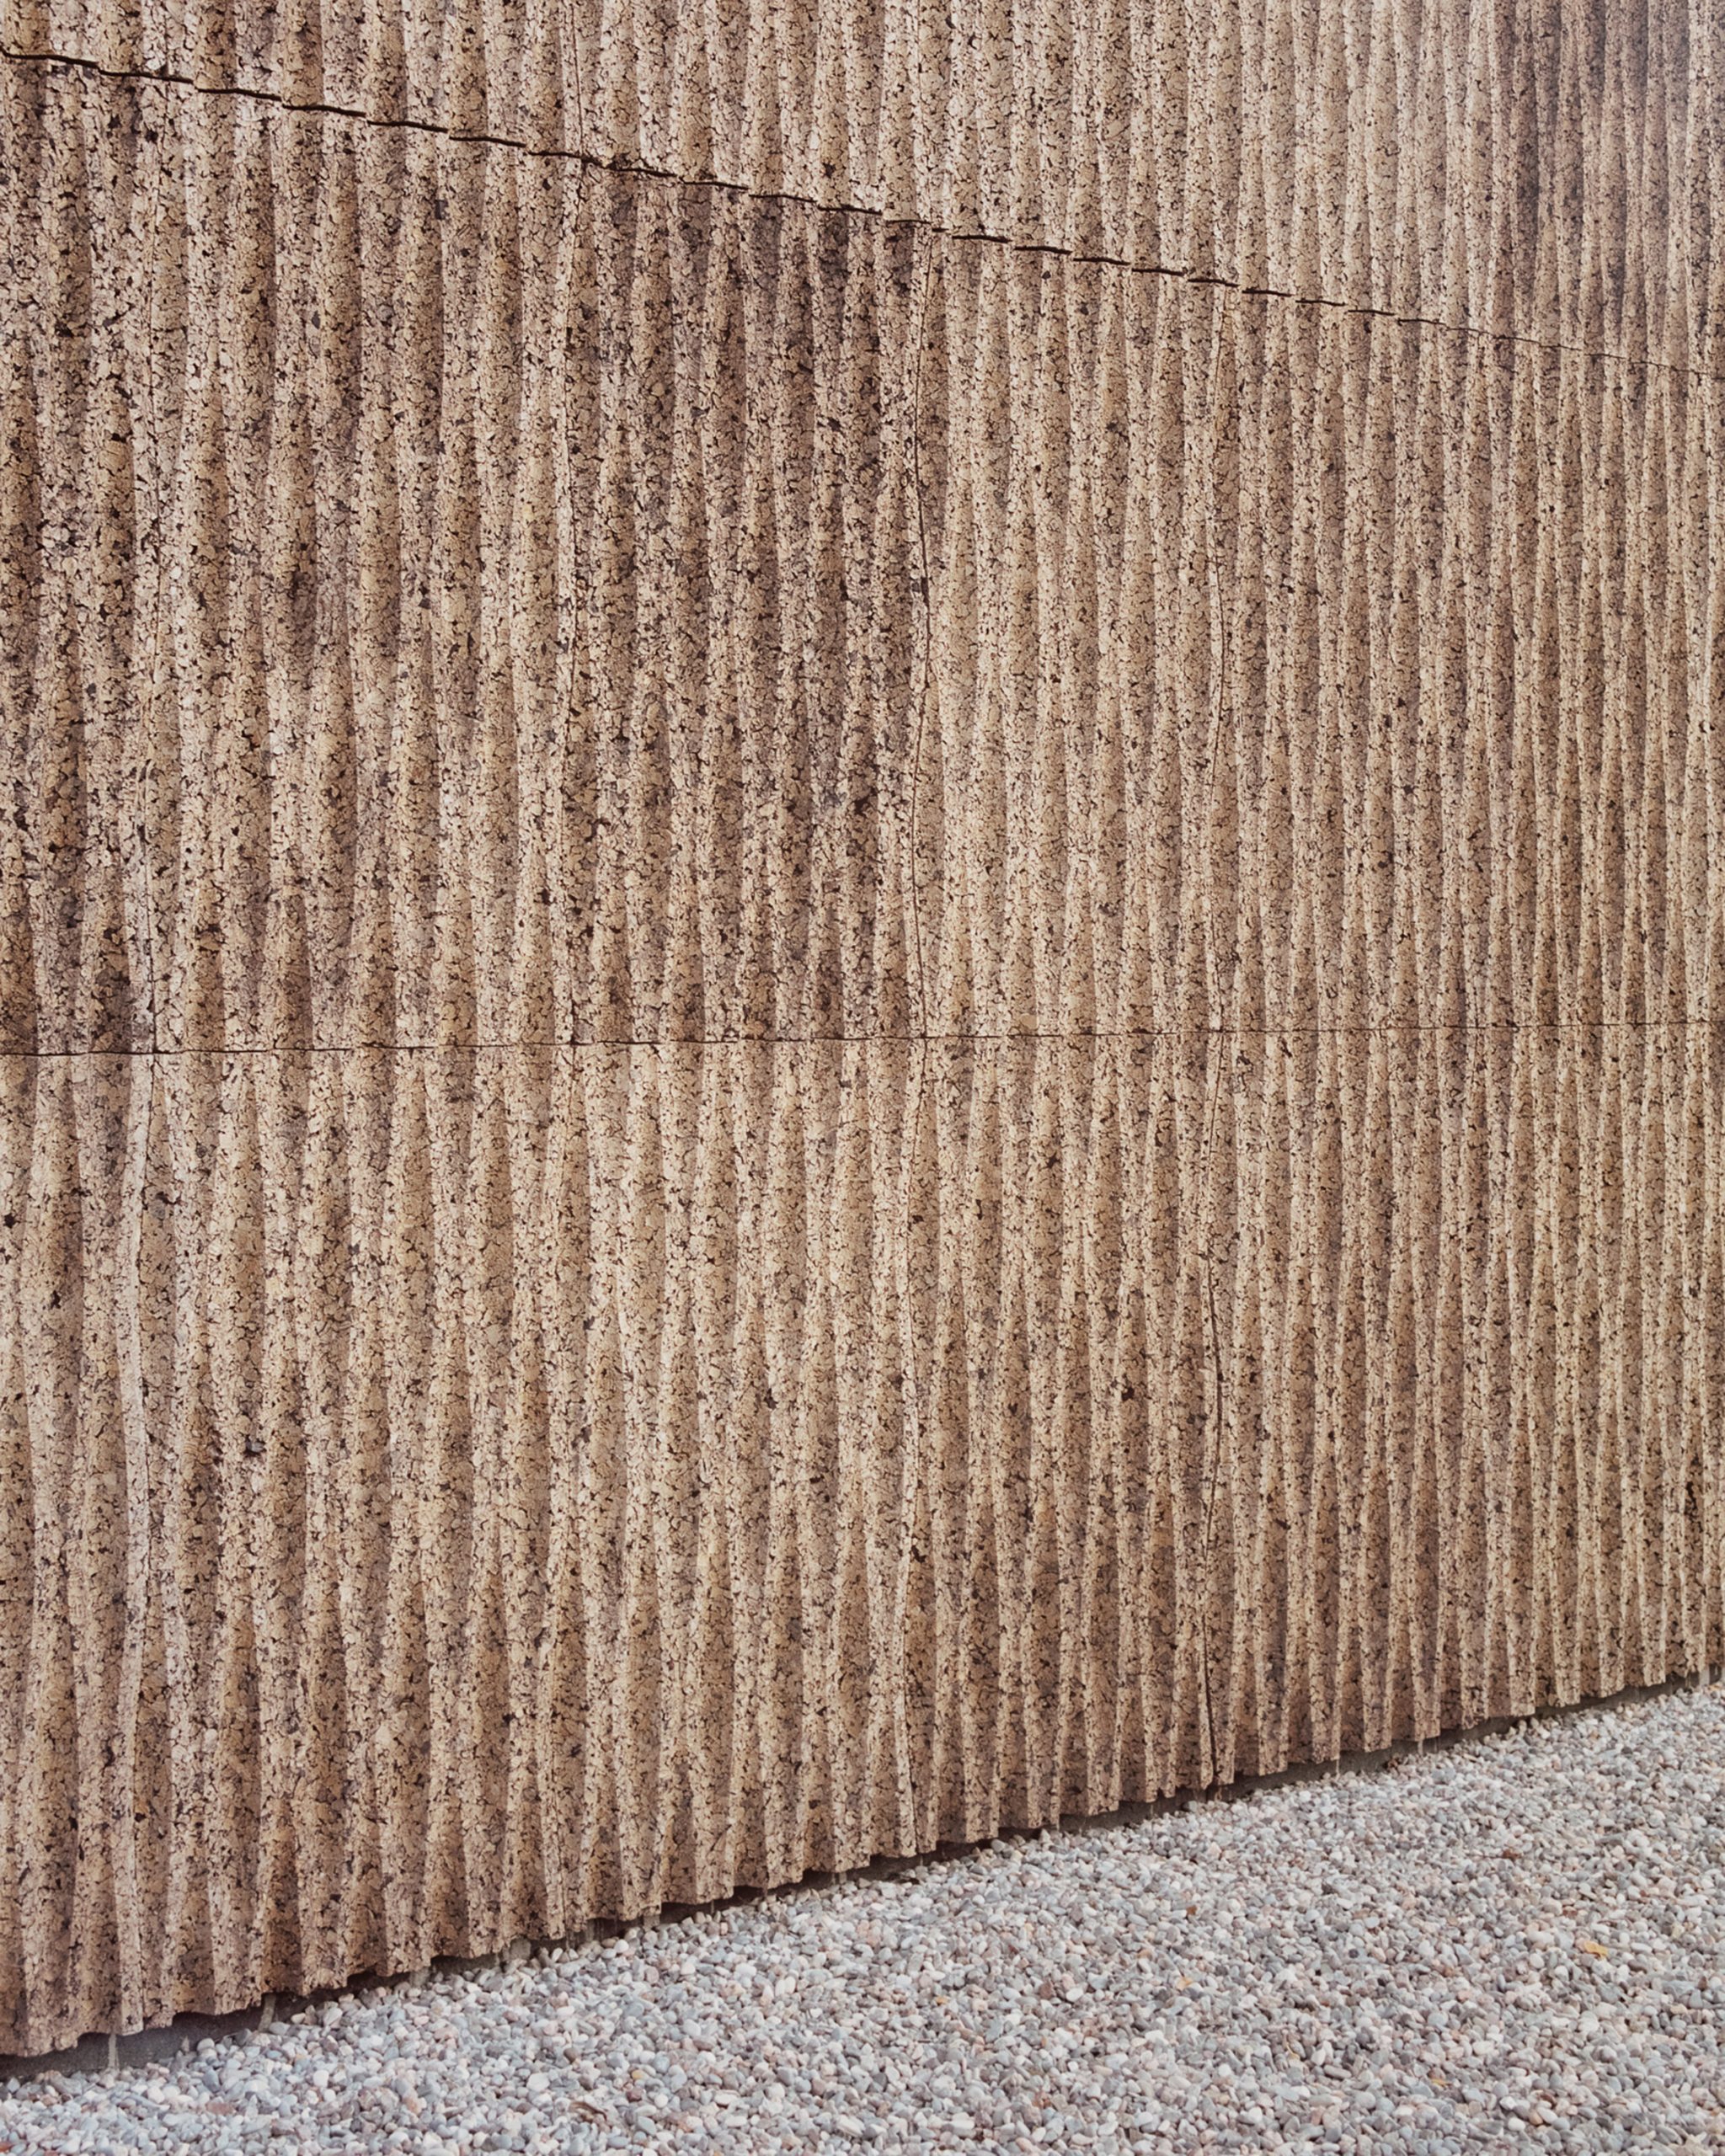 The cork cladding of The House of Wood, Straw and Cork by LCA Architetti